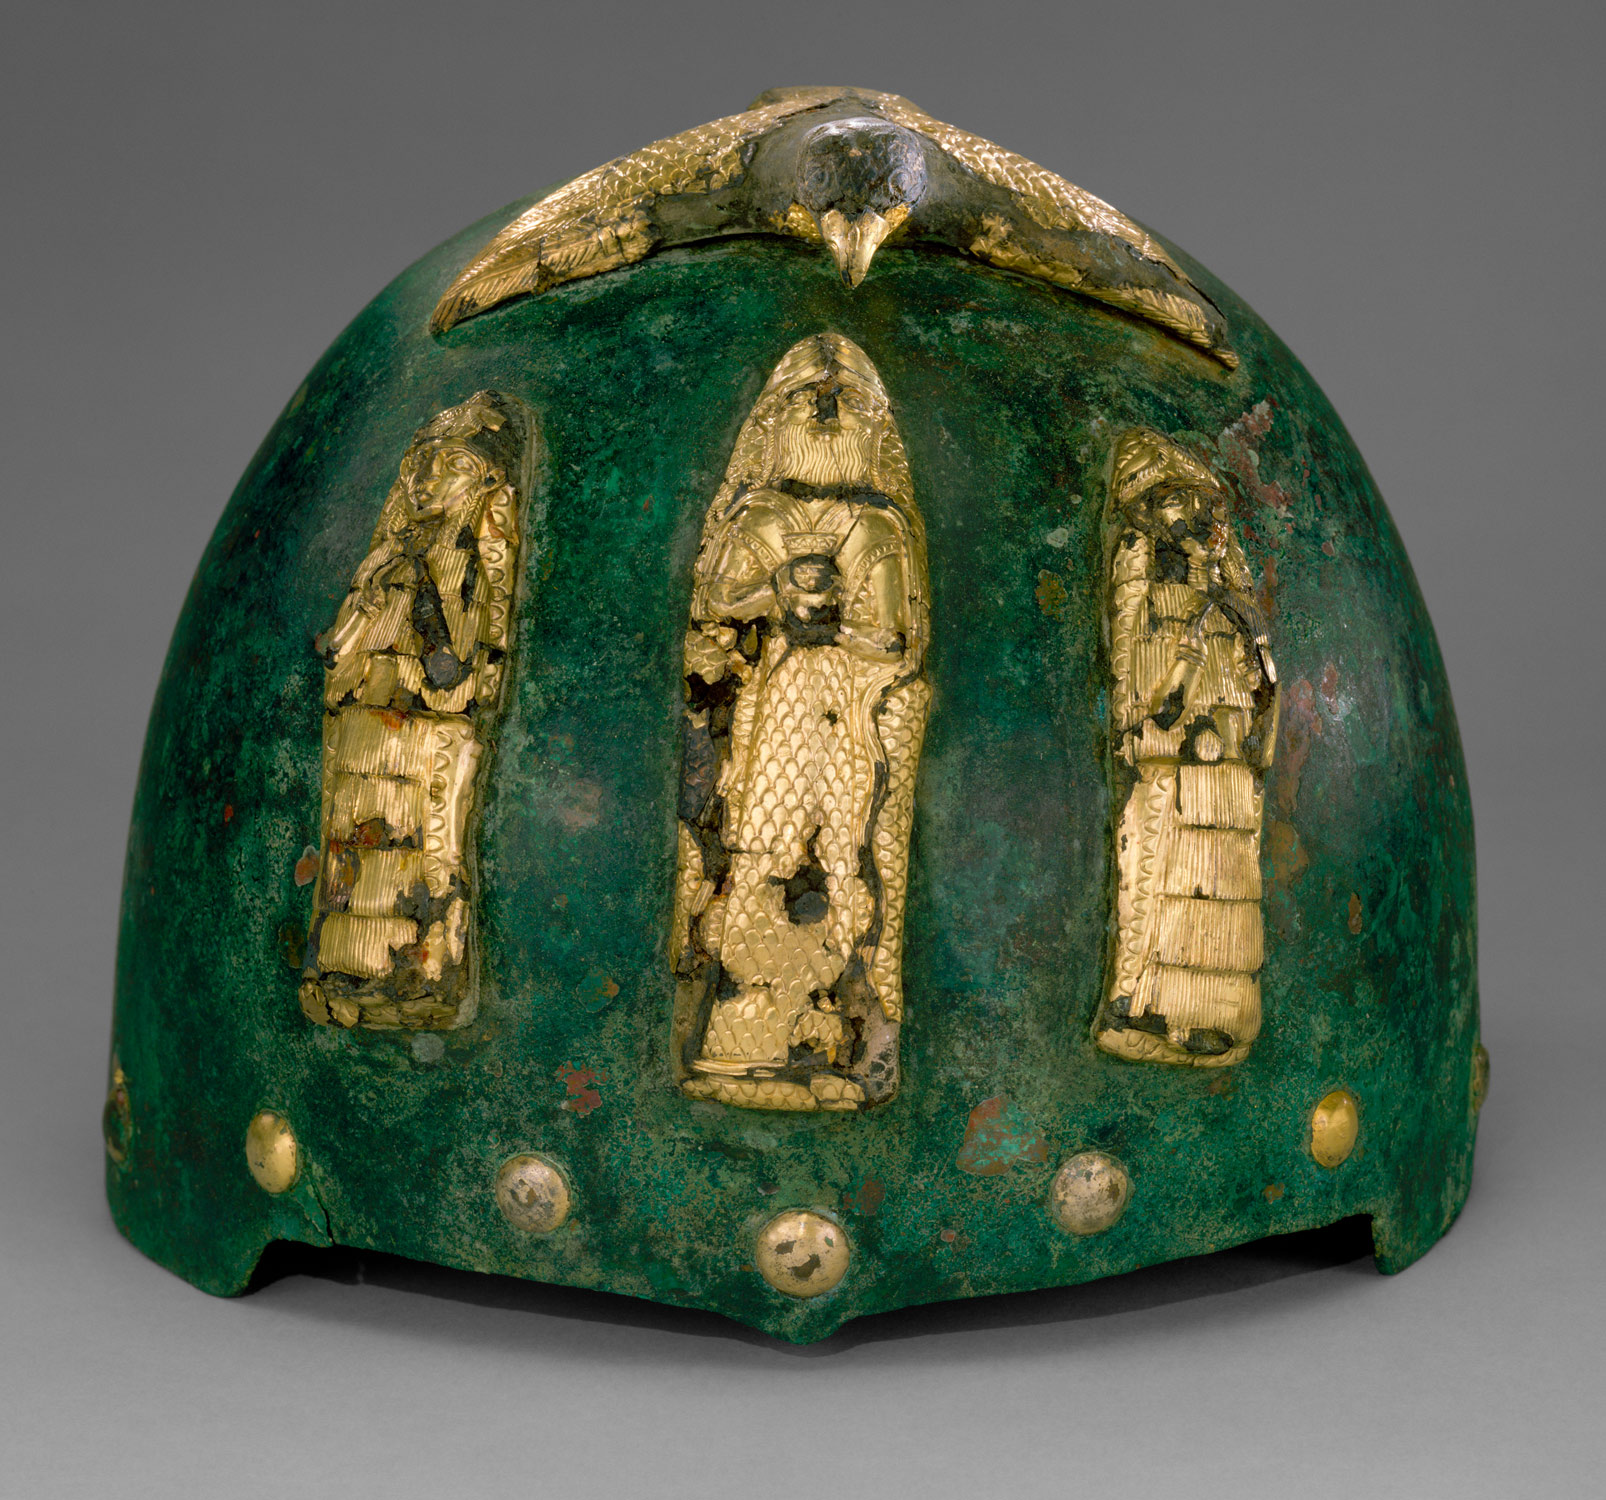 Helmet with divine figures beneath a bird with outstretched wings